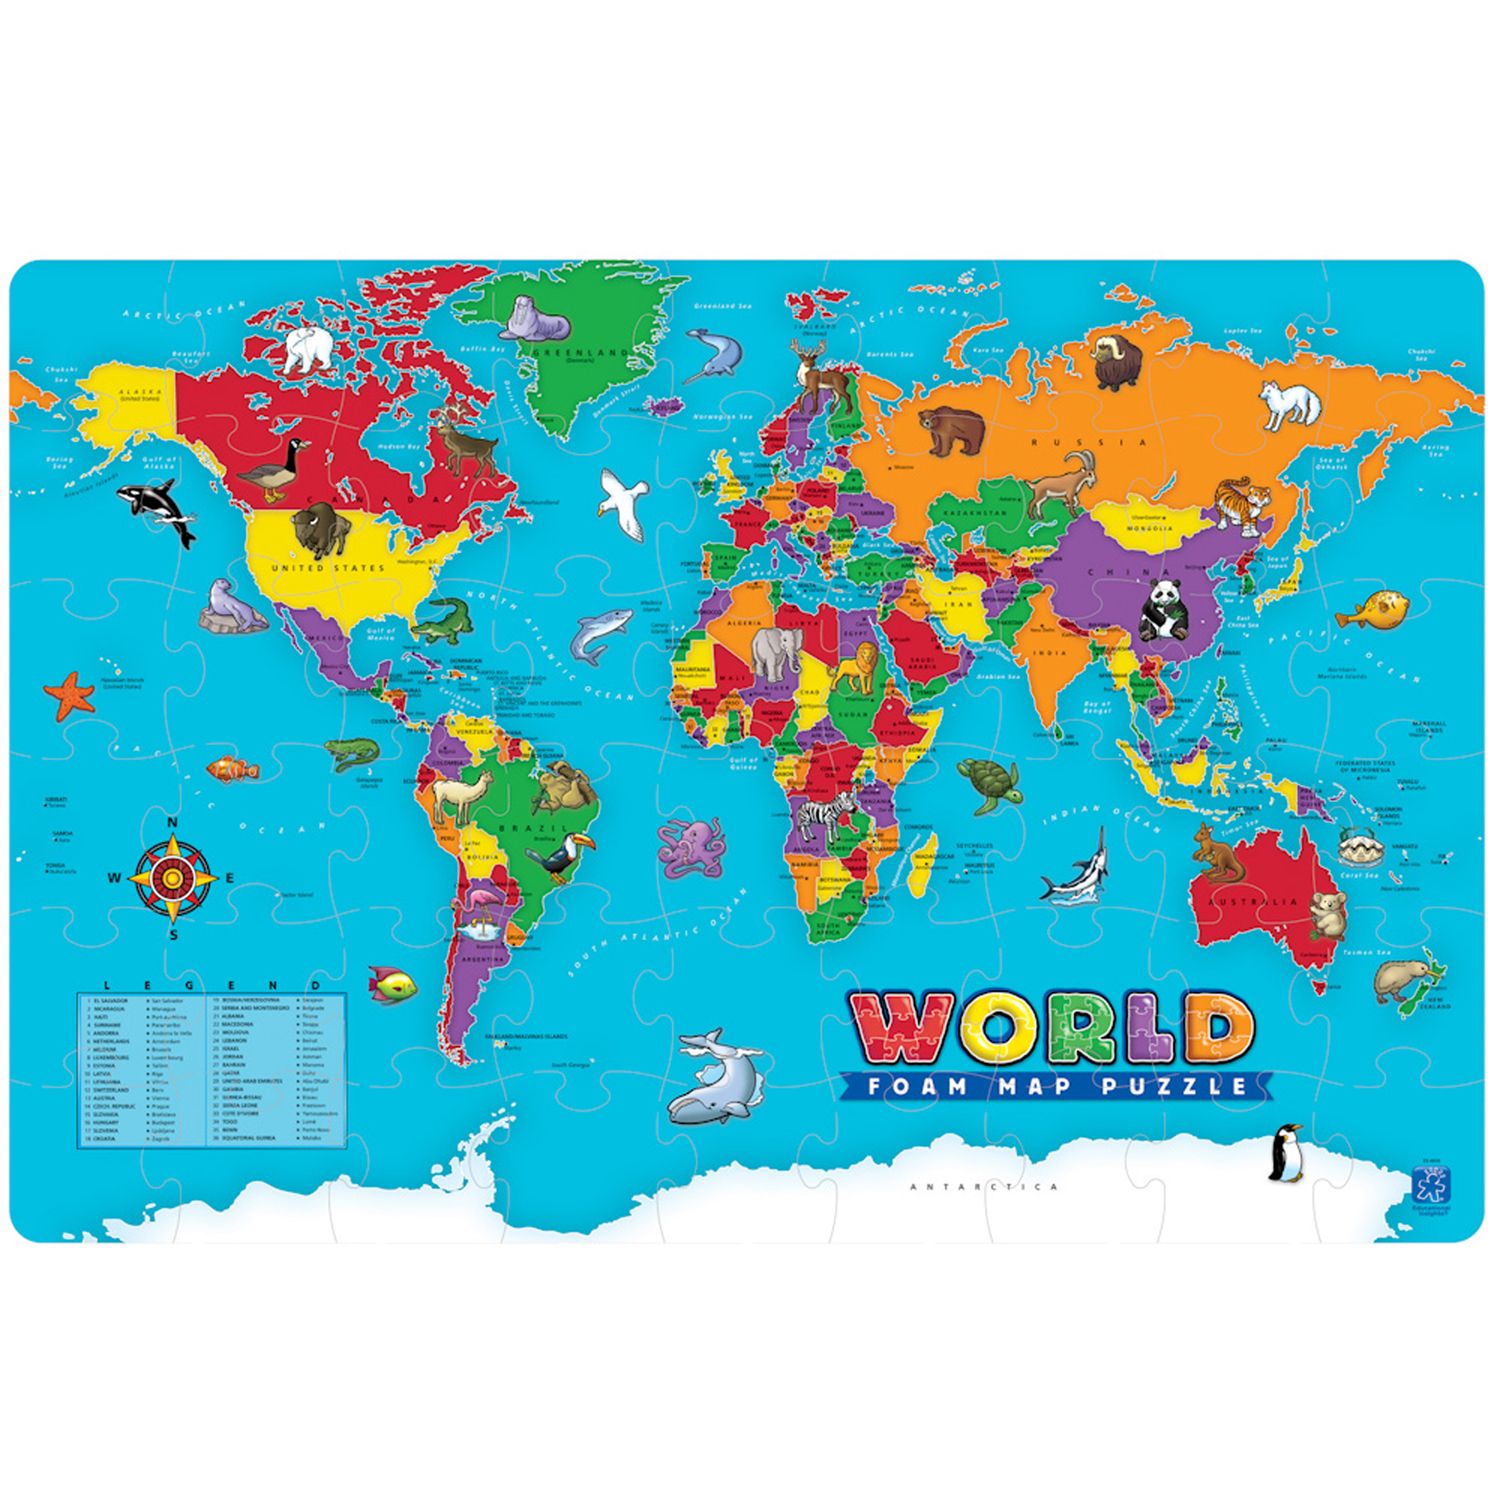 Tactic World Map 1000-Pc. Puzzle